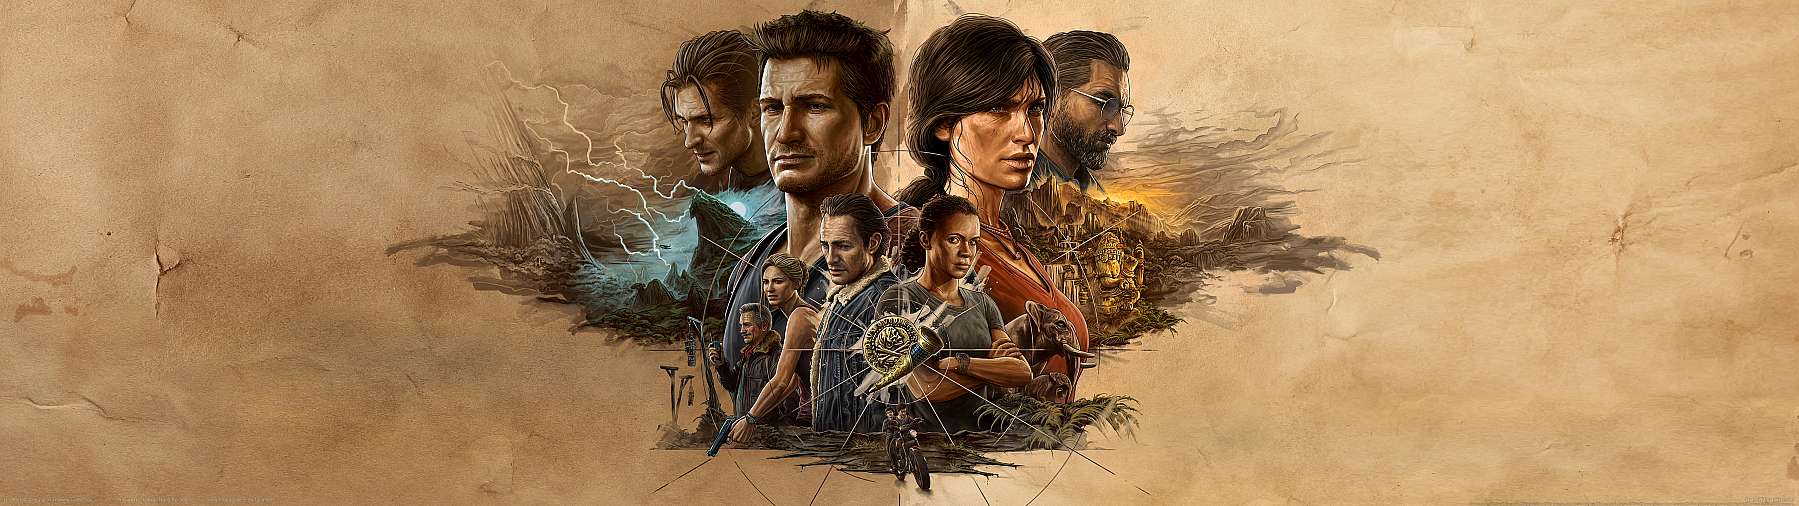 Uncharted: Legacy of Thieves Collection superwide wallpaper or background 01